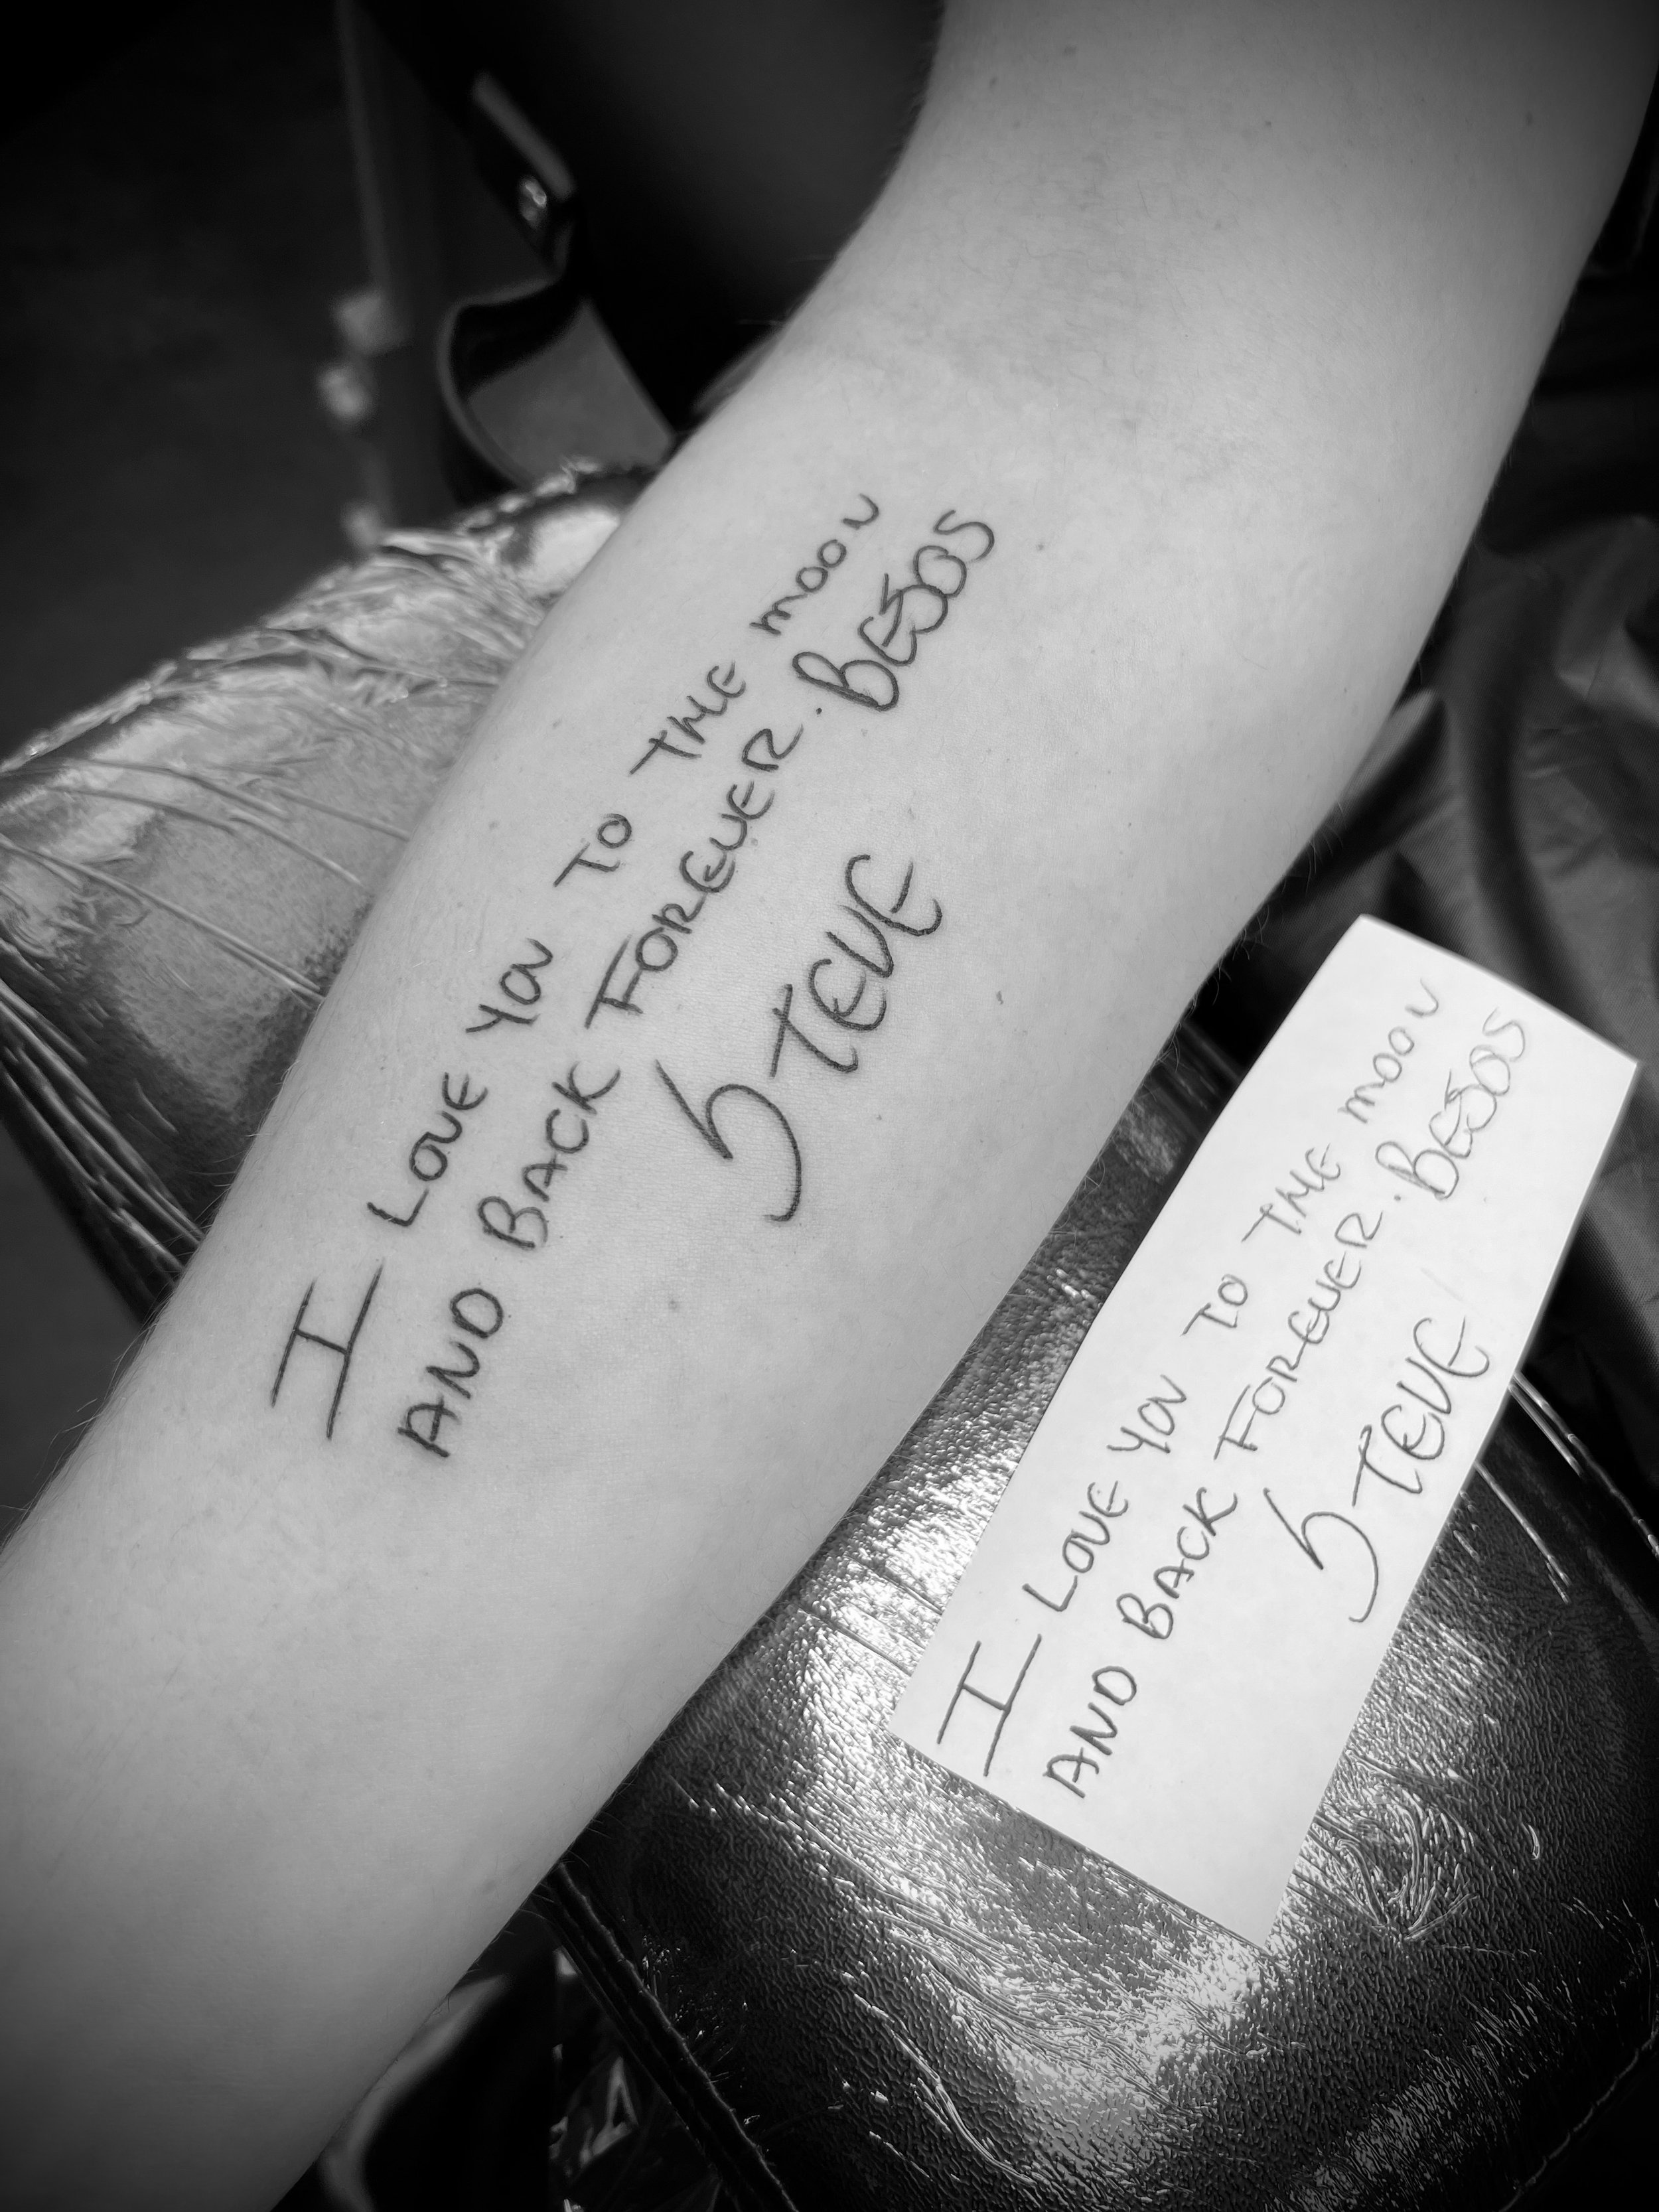 my tattoo, one year later | mom and dad's handwriting. possi… | Flickr